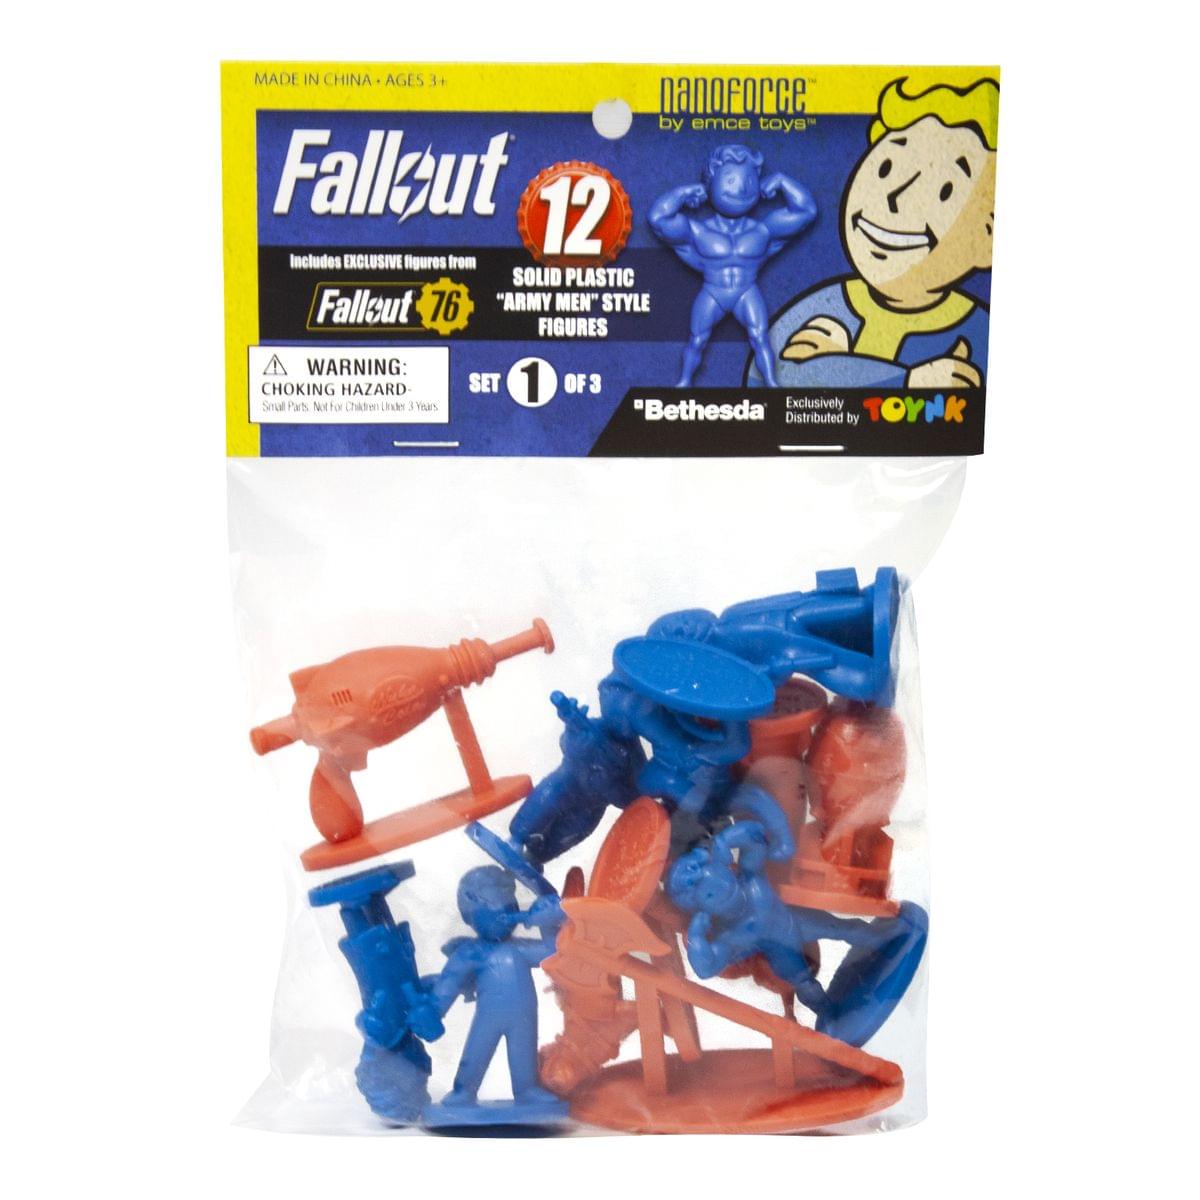 Fallout Nanoforce Series 1 Army Builder Figure Collection - Bagged Set 1